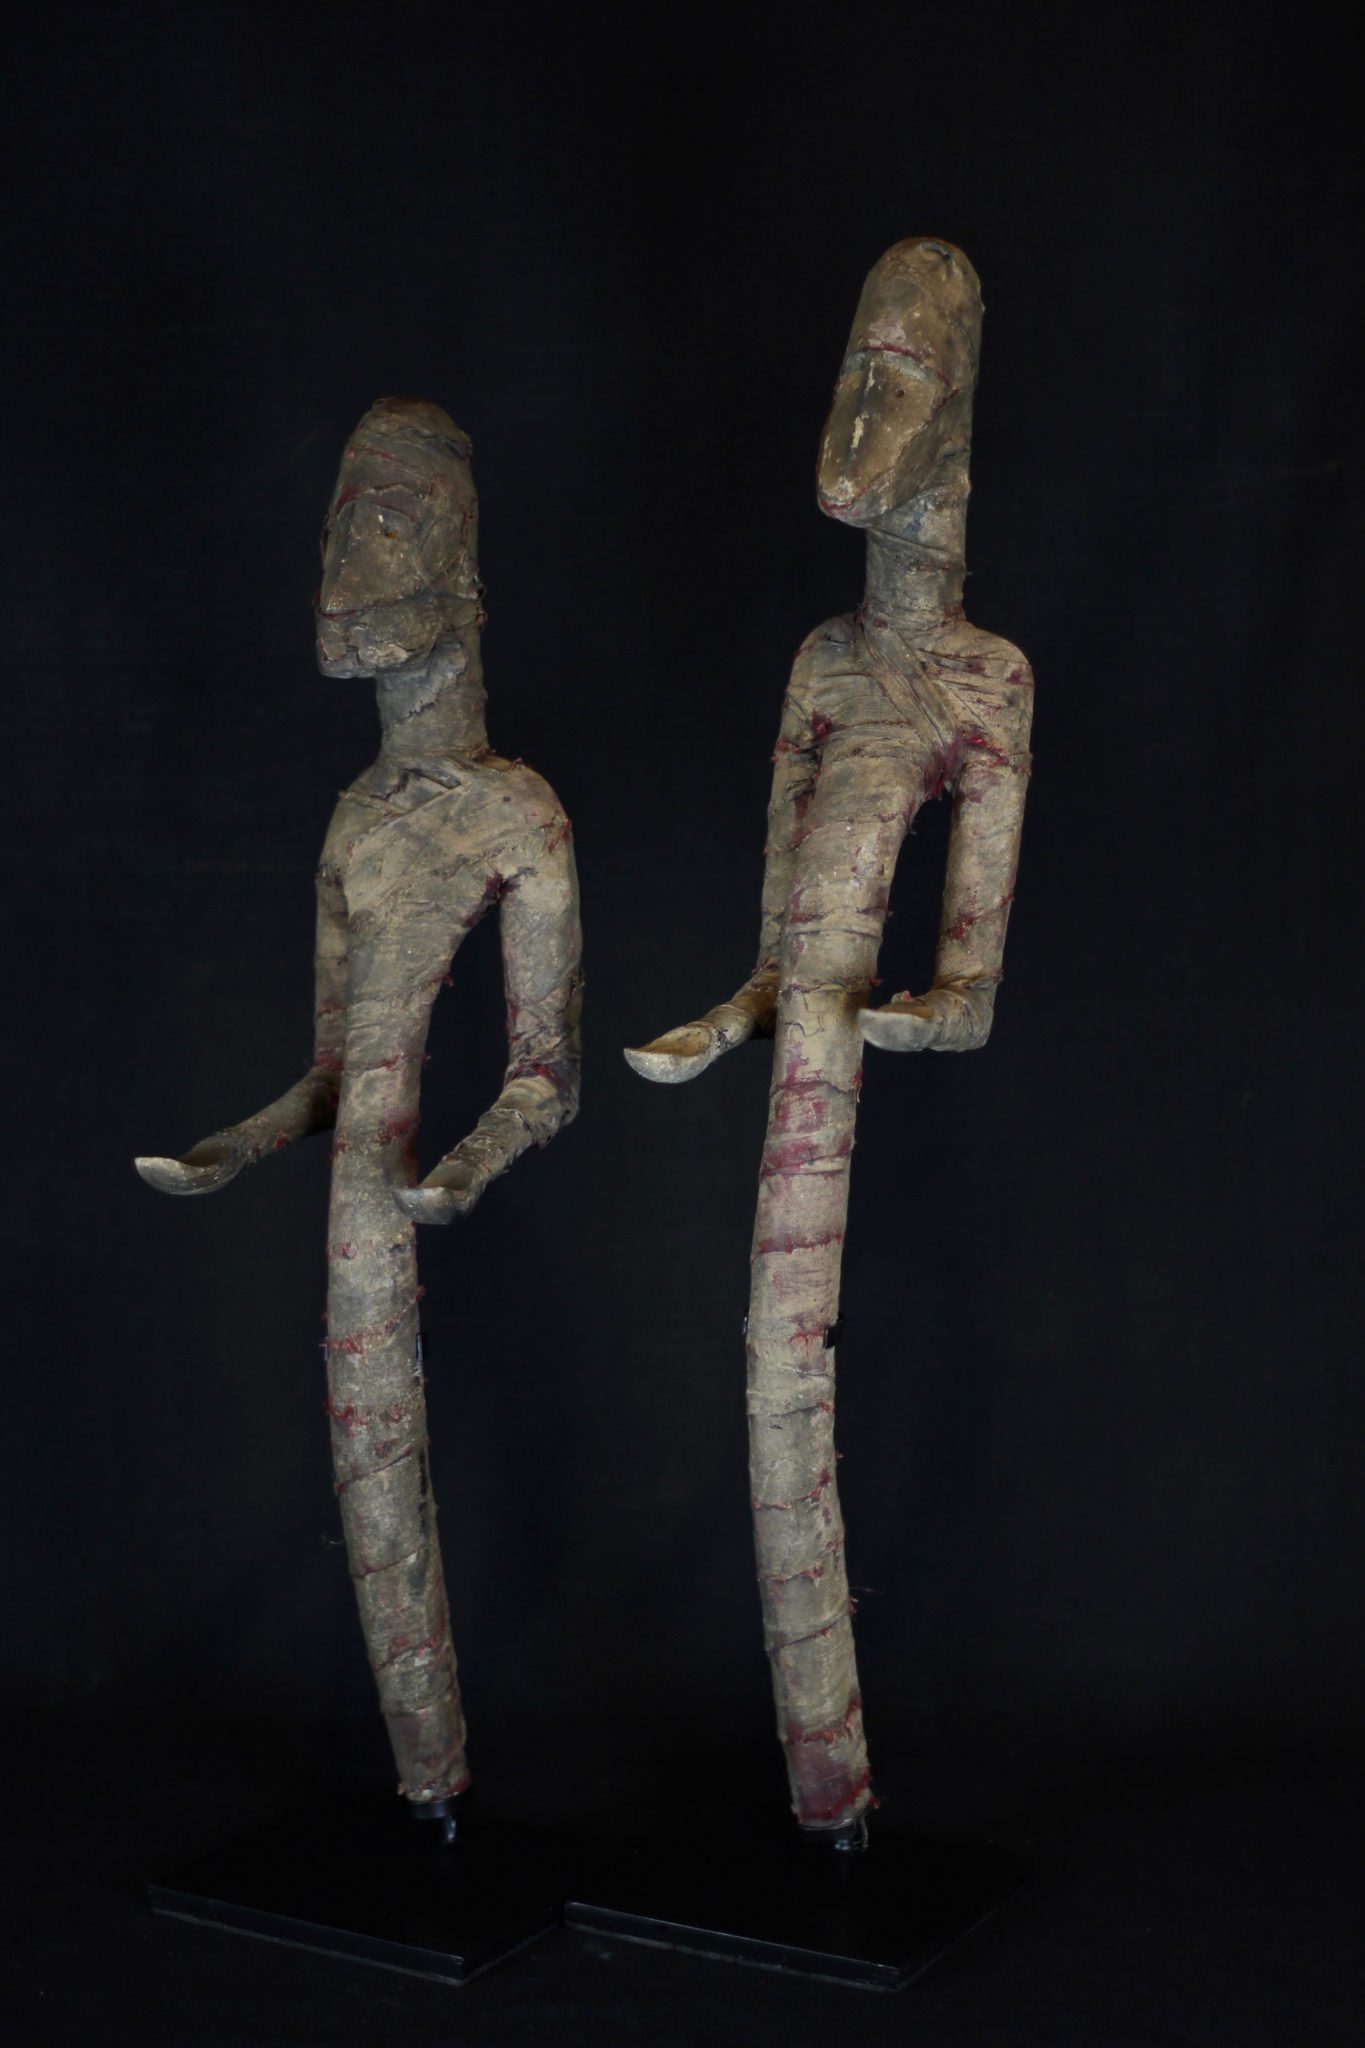 Shaman Figure (rare), Atauro Island, Lesser Sunda Islands, Indonesia Early 20th c. Wood, cloth. Used to protect people from harmful spirits during rituals. Faded and patinated with use and age, original red color of cloth still visible. Dimensions: (left - 22 ½” 5 ½’ x 7 ½”, $1200.); (right - 25 ¼’ x 4 ¼” x 6 ½”, $1200.)